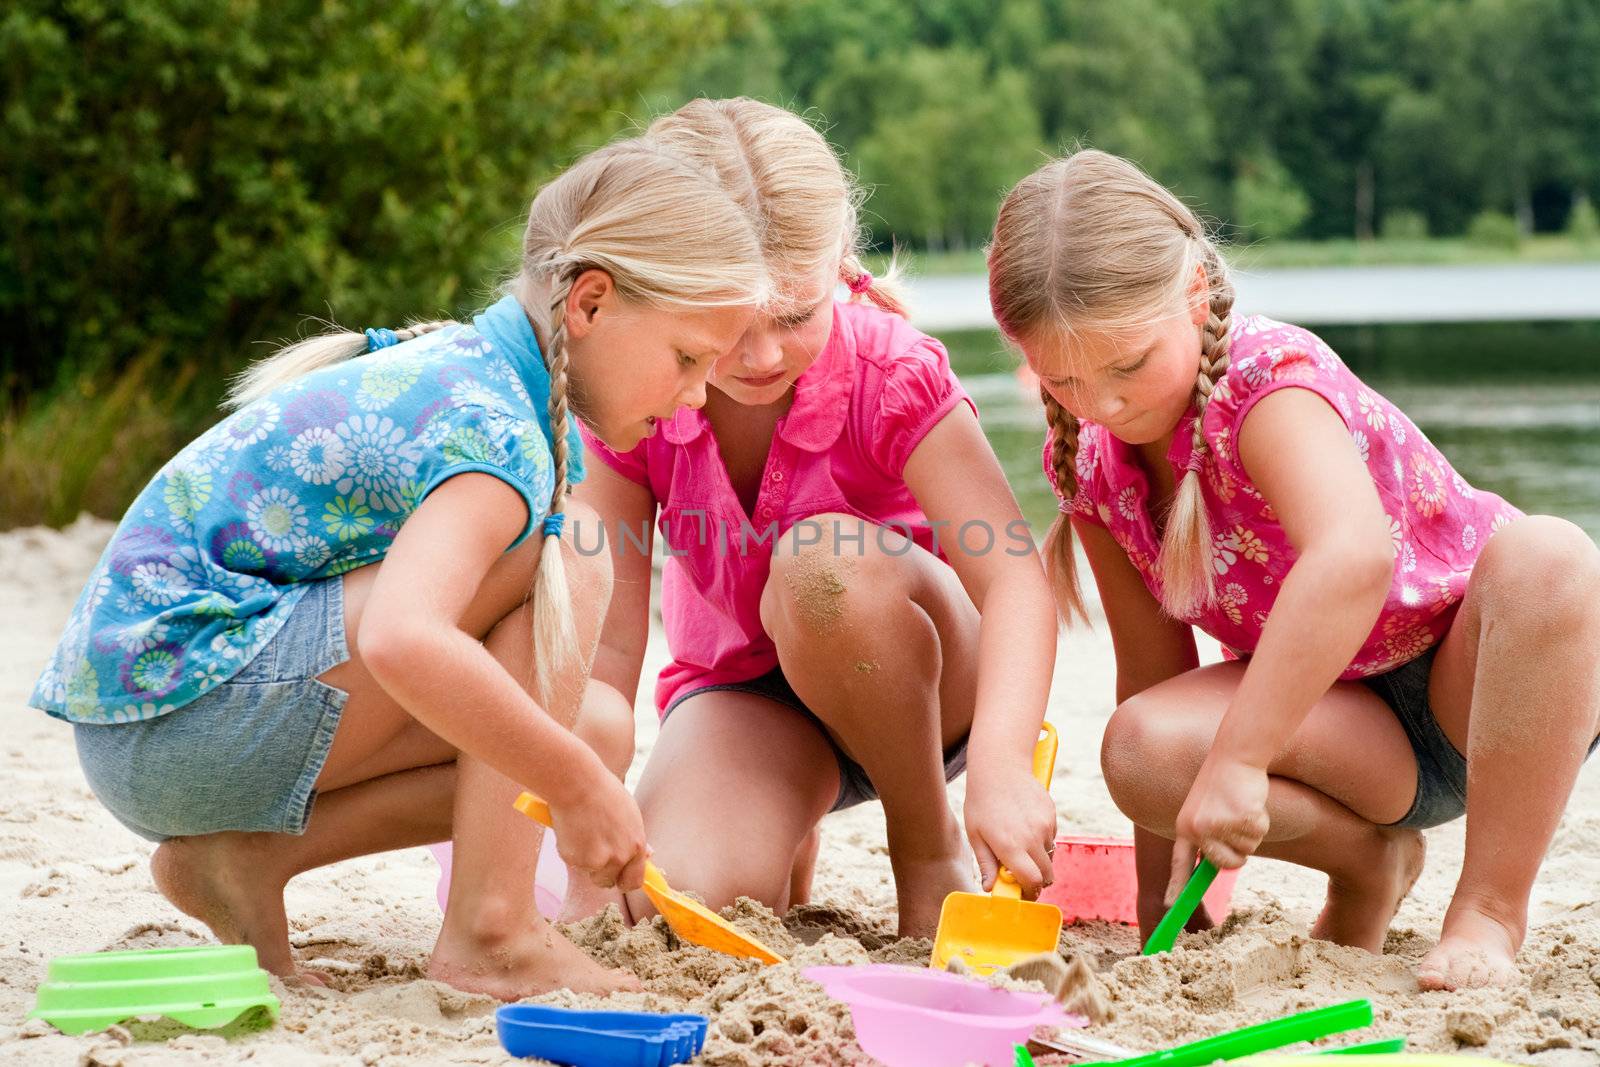 The girls digging in the sand by DNFStyle